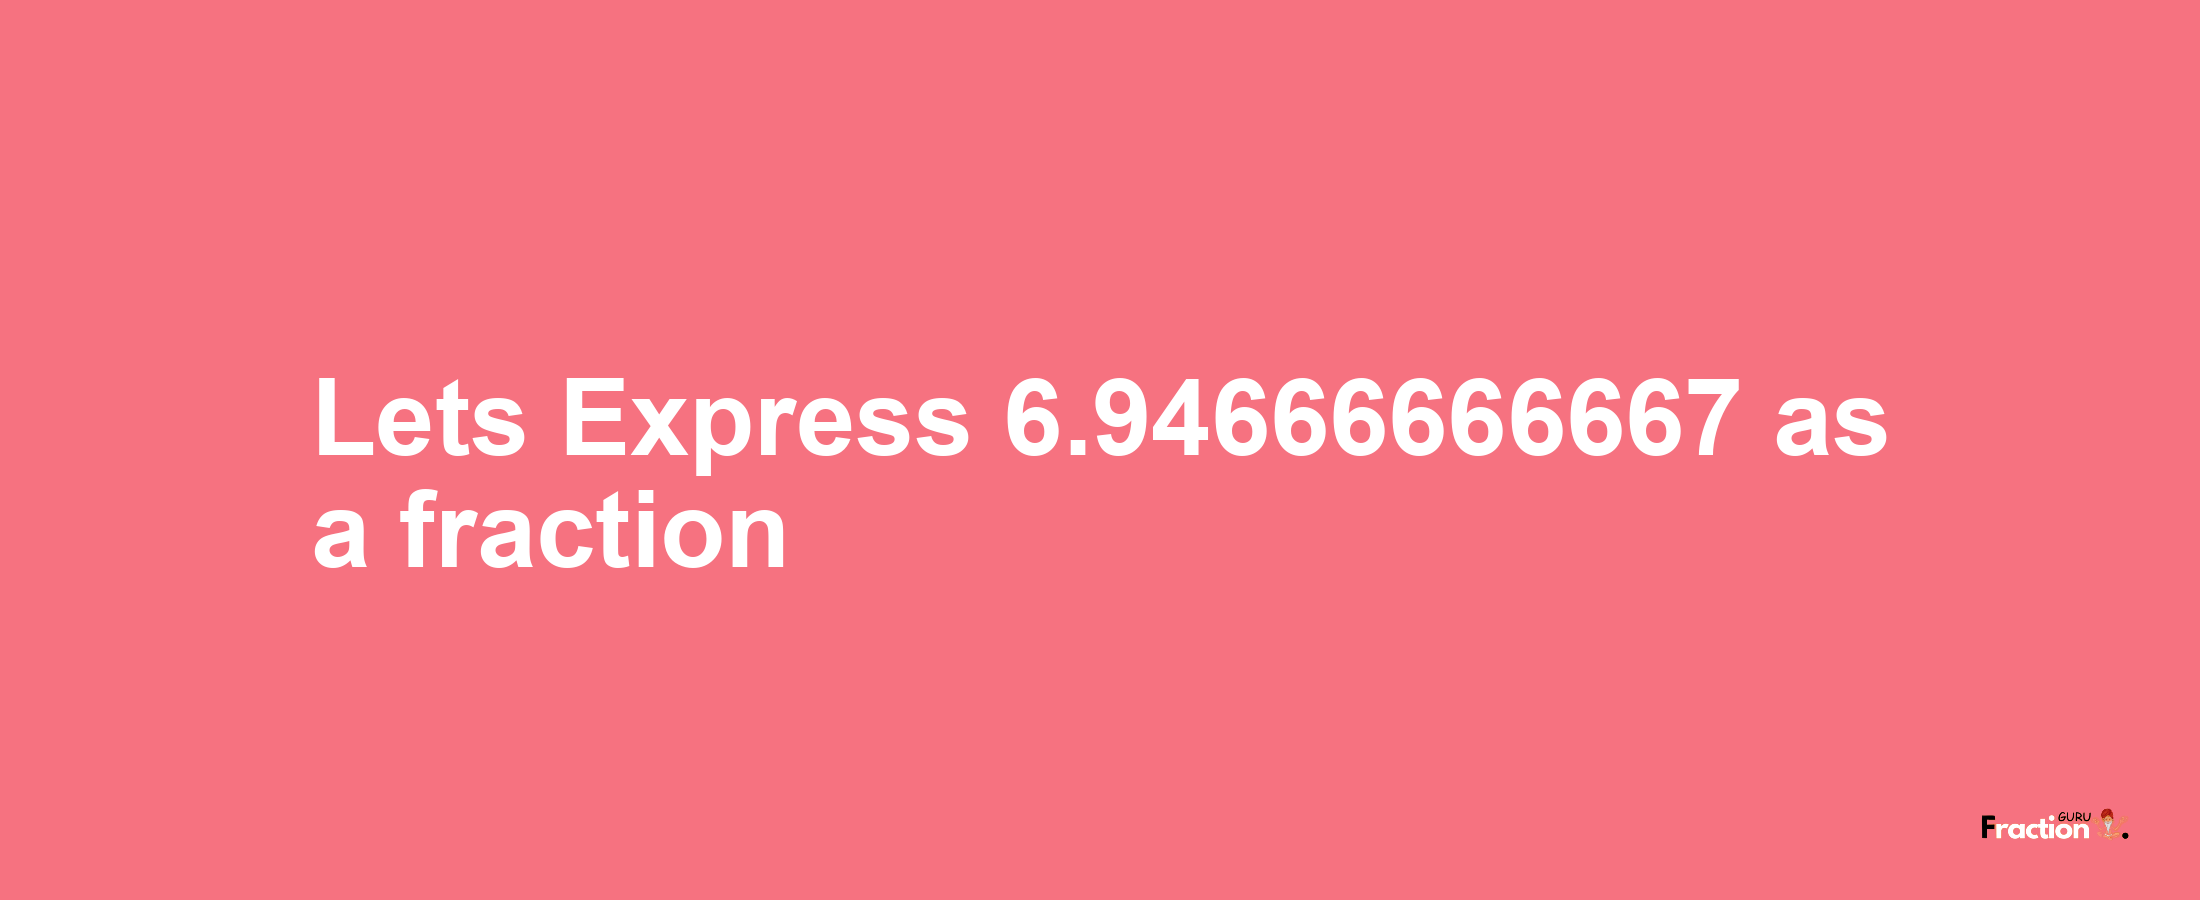 Lets Express 6.94666666667 as afraction